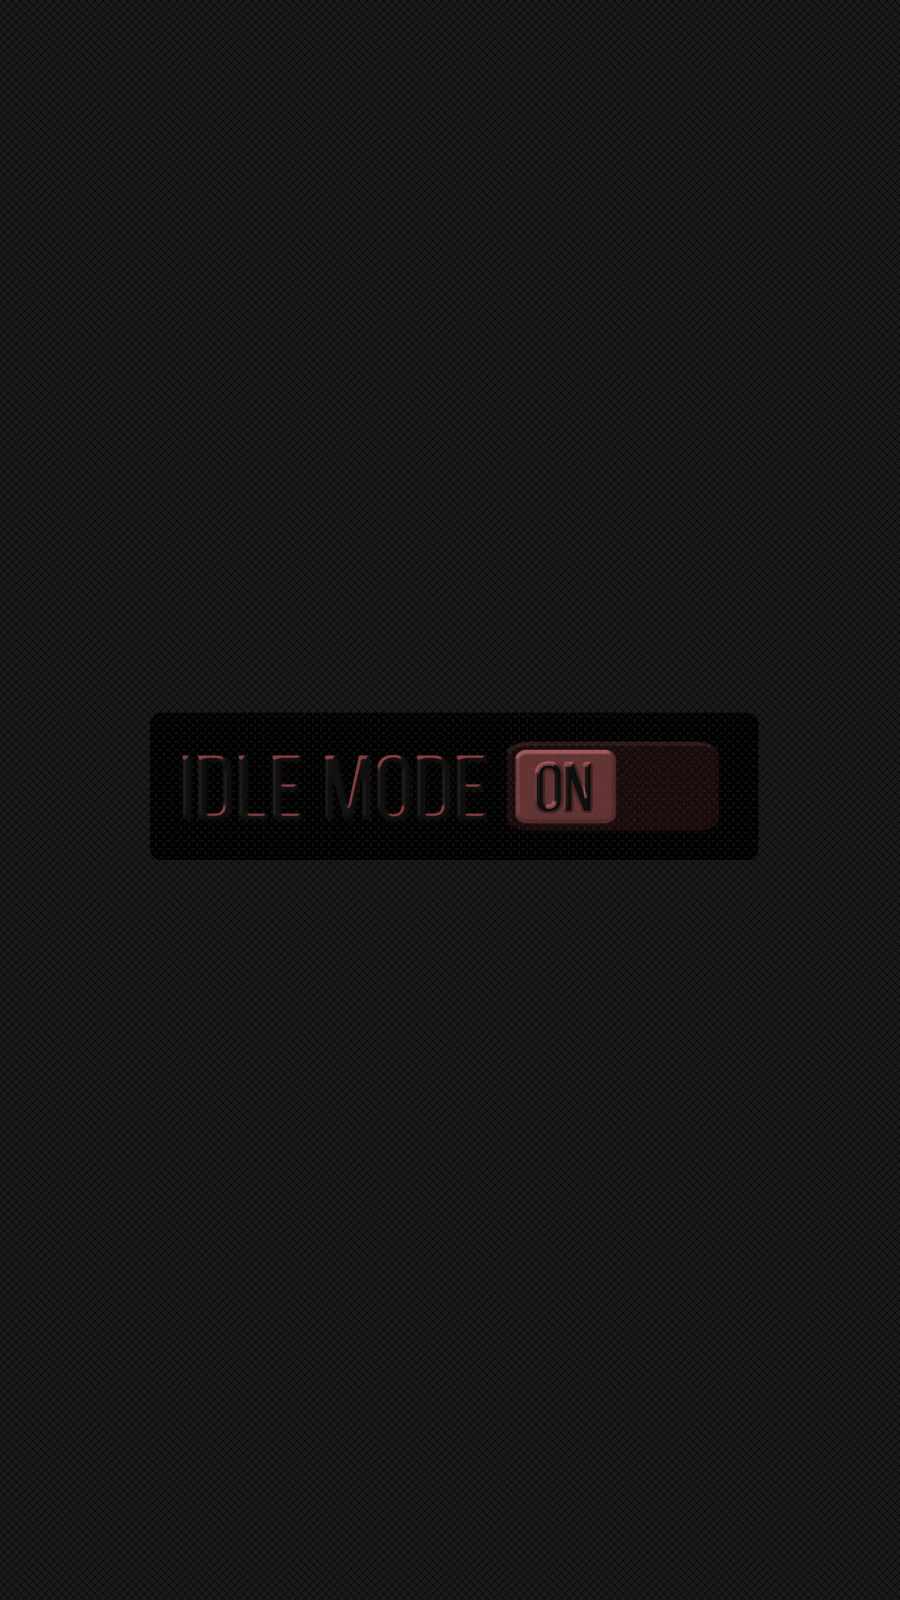 Idle Mode ON IPhone Wallpaper HD  IPhone Wallpapers